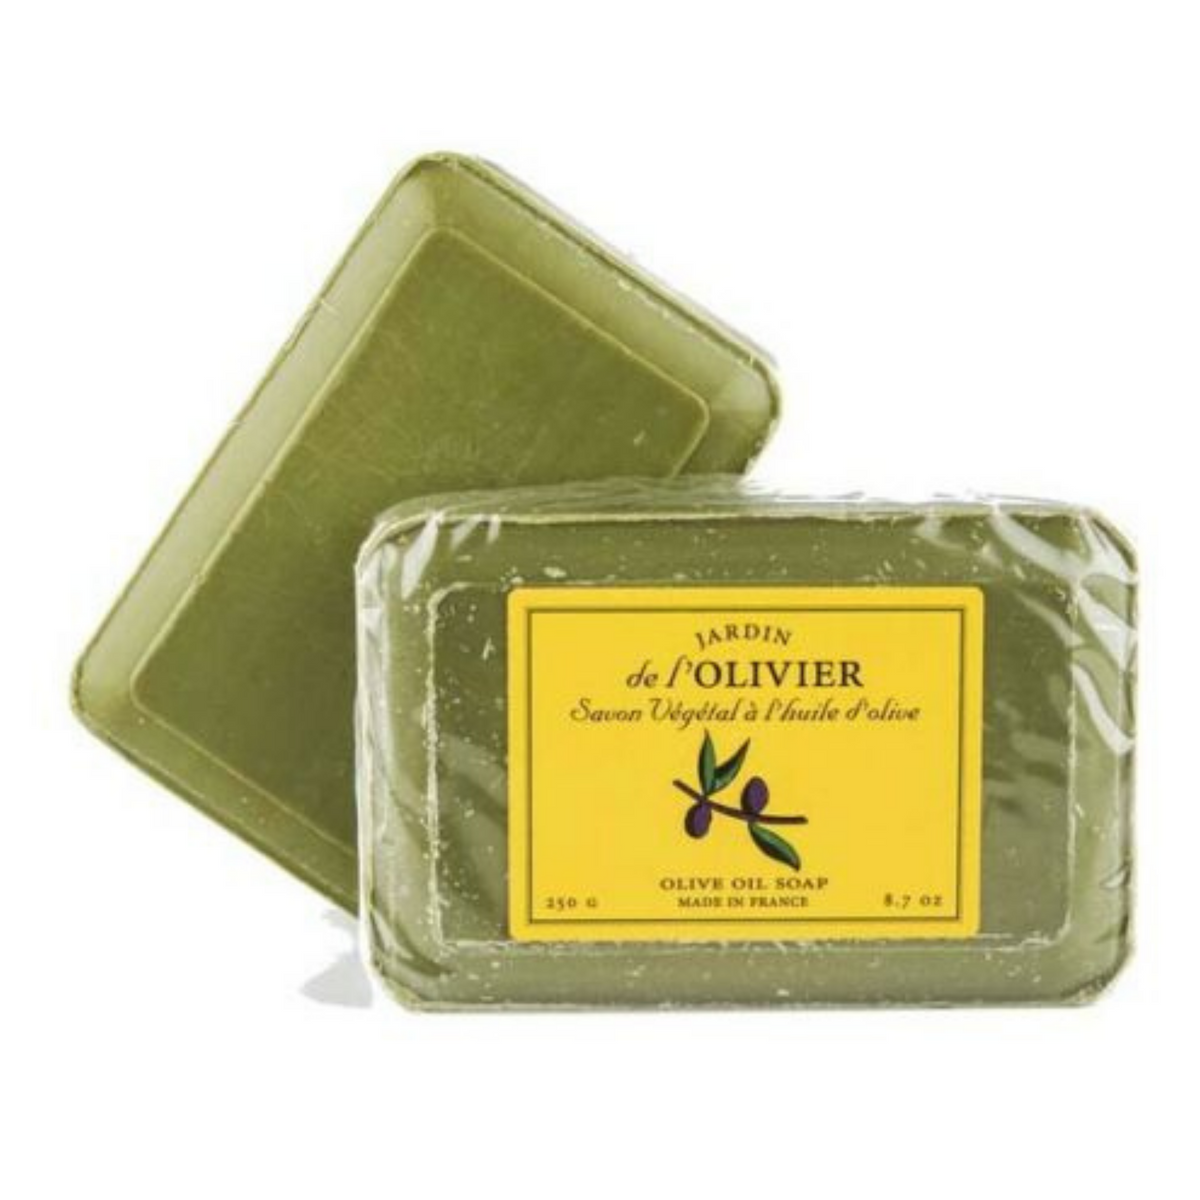 Primary Image of Olive Oil Soap